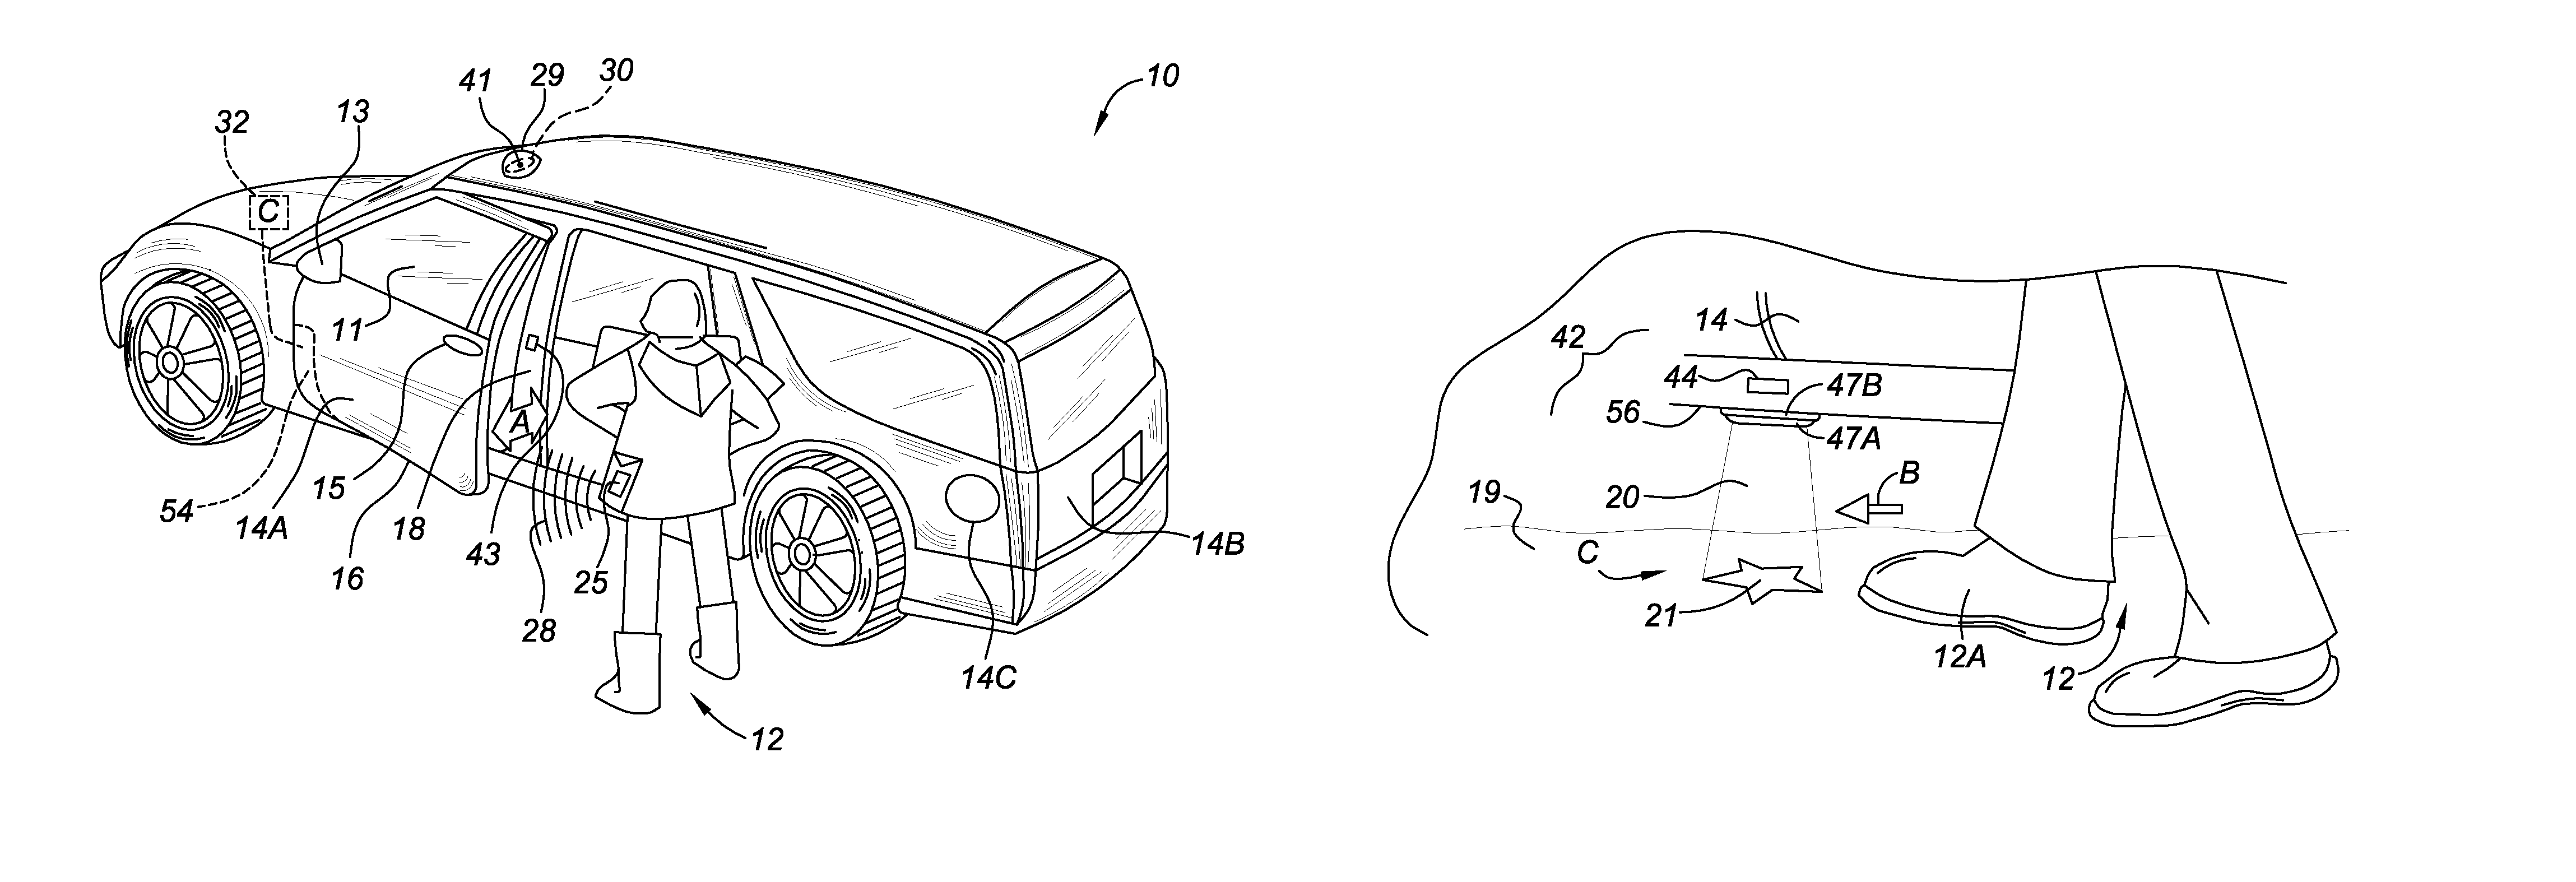 Arms full vehicle closure activation apparatus and method